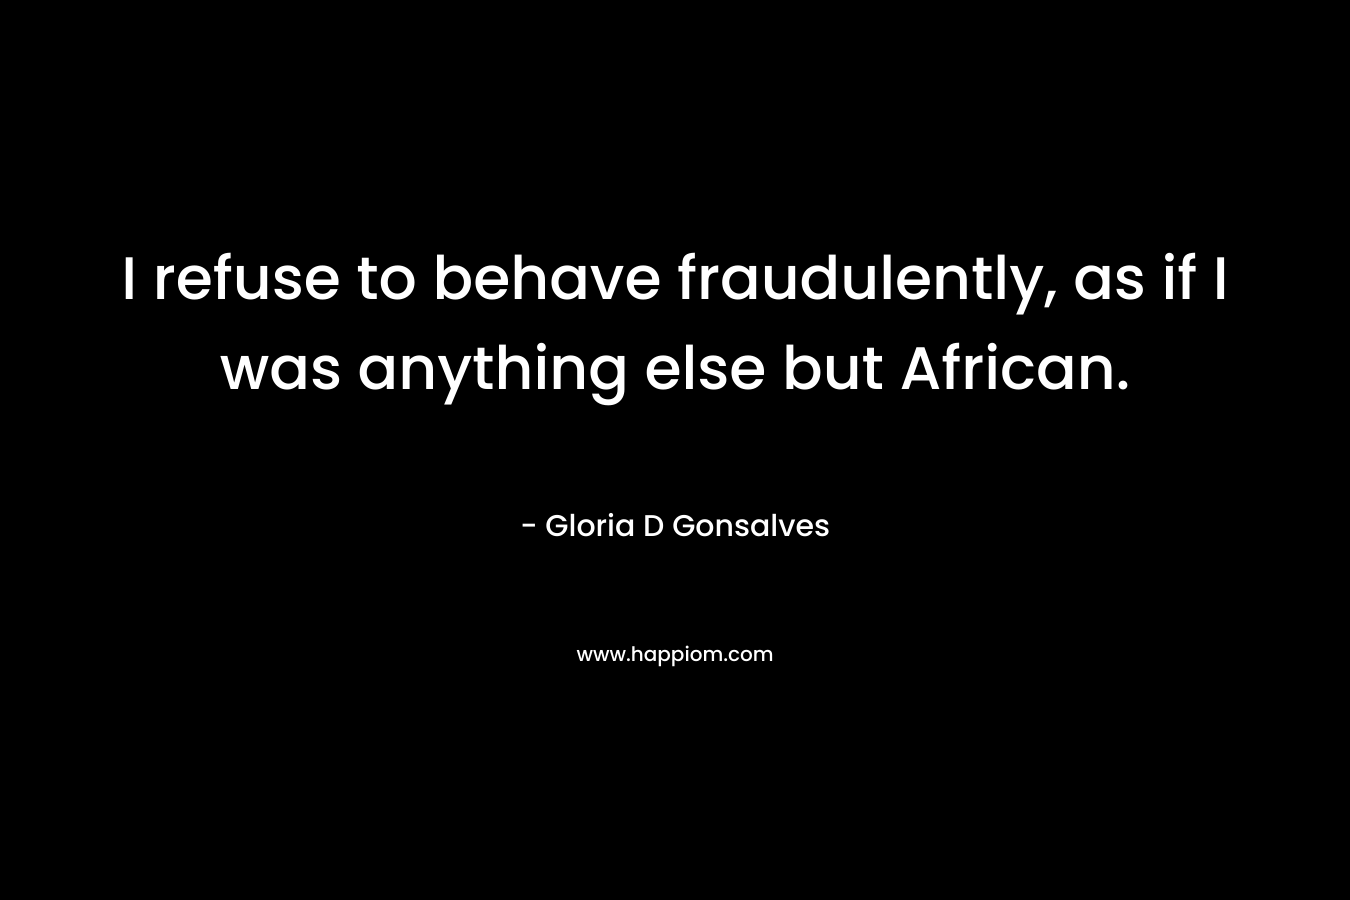 I refuse to behave fraudulently, as if I was anything else but African.